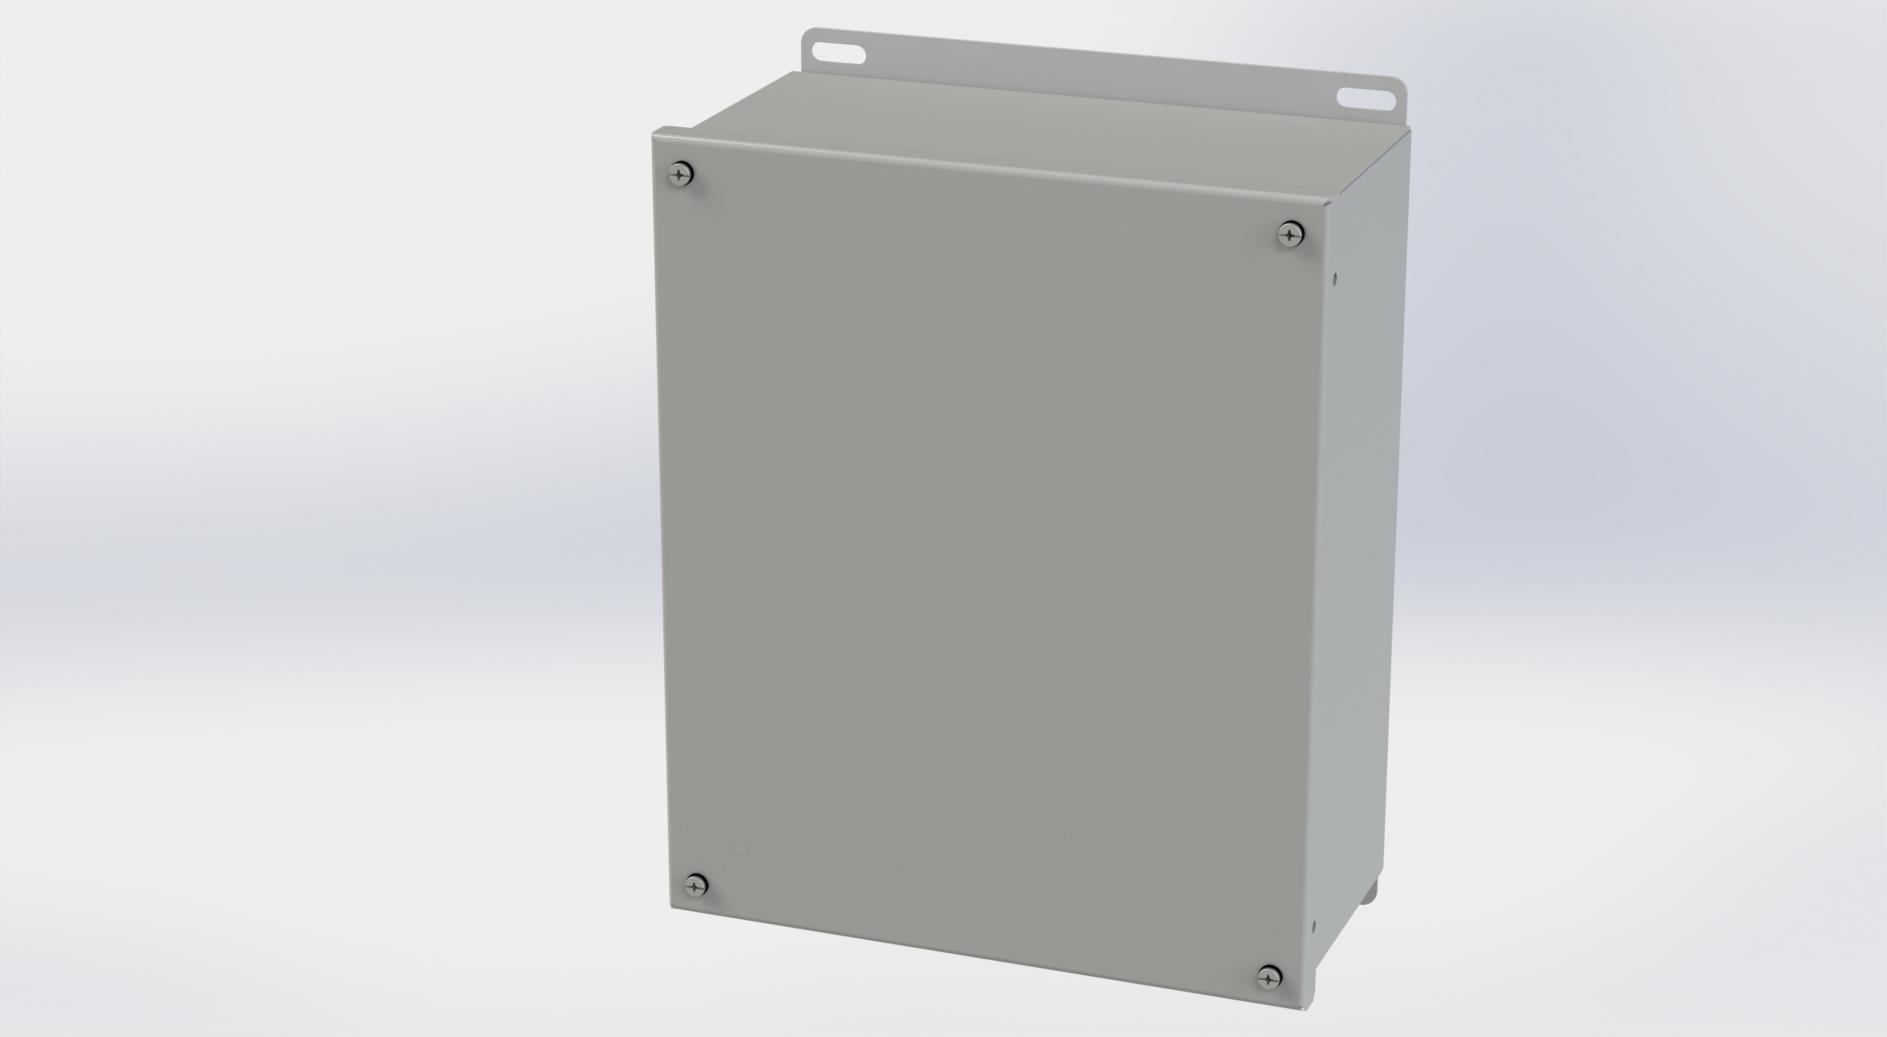 Saginaw Control SCE-1210SC SC Enclosure, Height:12.13", Width:10.00", Depth:5.00", ANSI-61 gray powder coating inside and out.  Optional sub-panels are powder coated white.